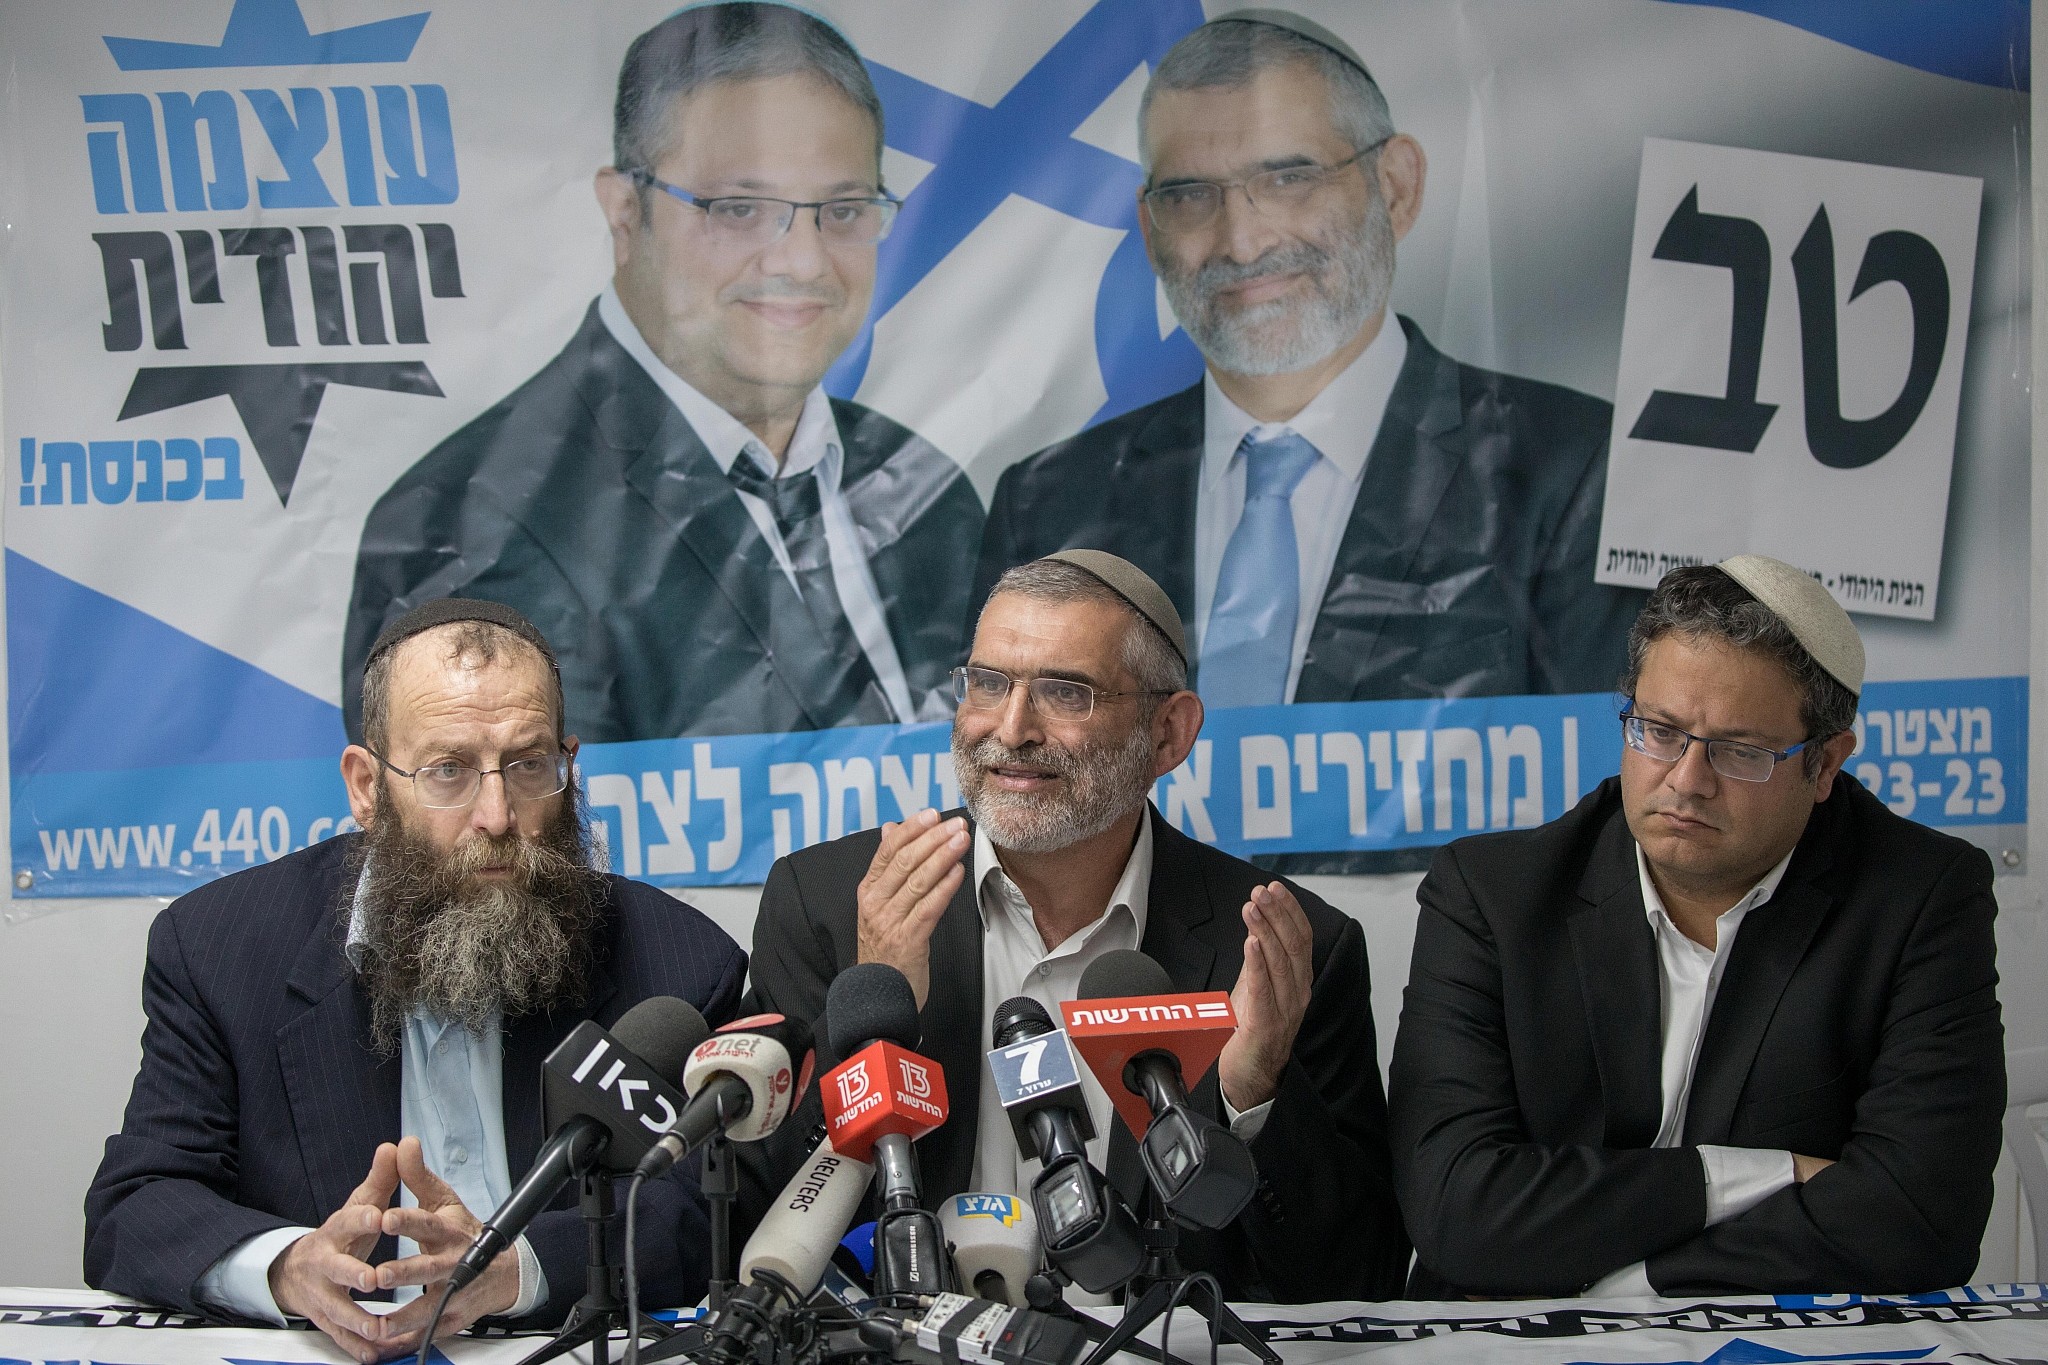 Otzma Yehudit party has opted to boycott the Wednesday Knesset votes in response to what they perceived as the government's inadequate response to the series of rocket strikes from the Gaza Strip.